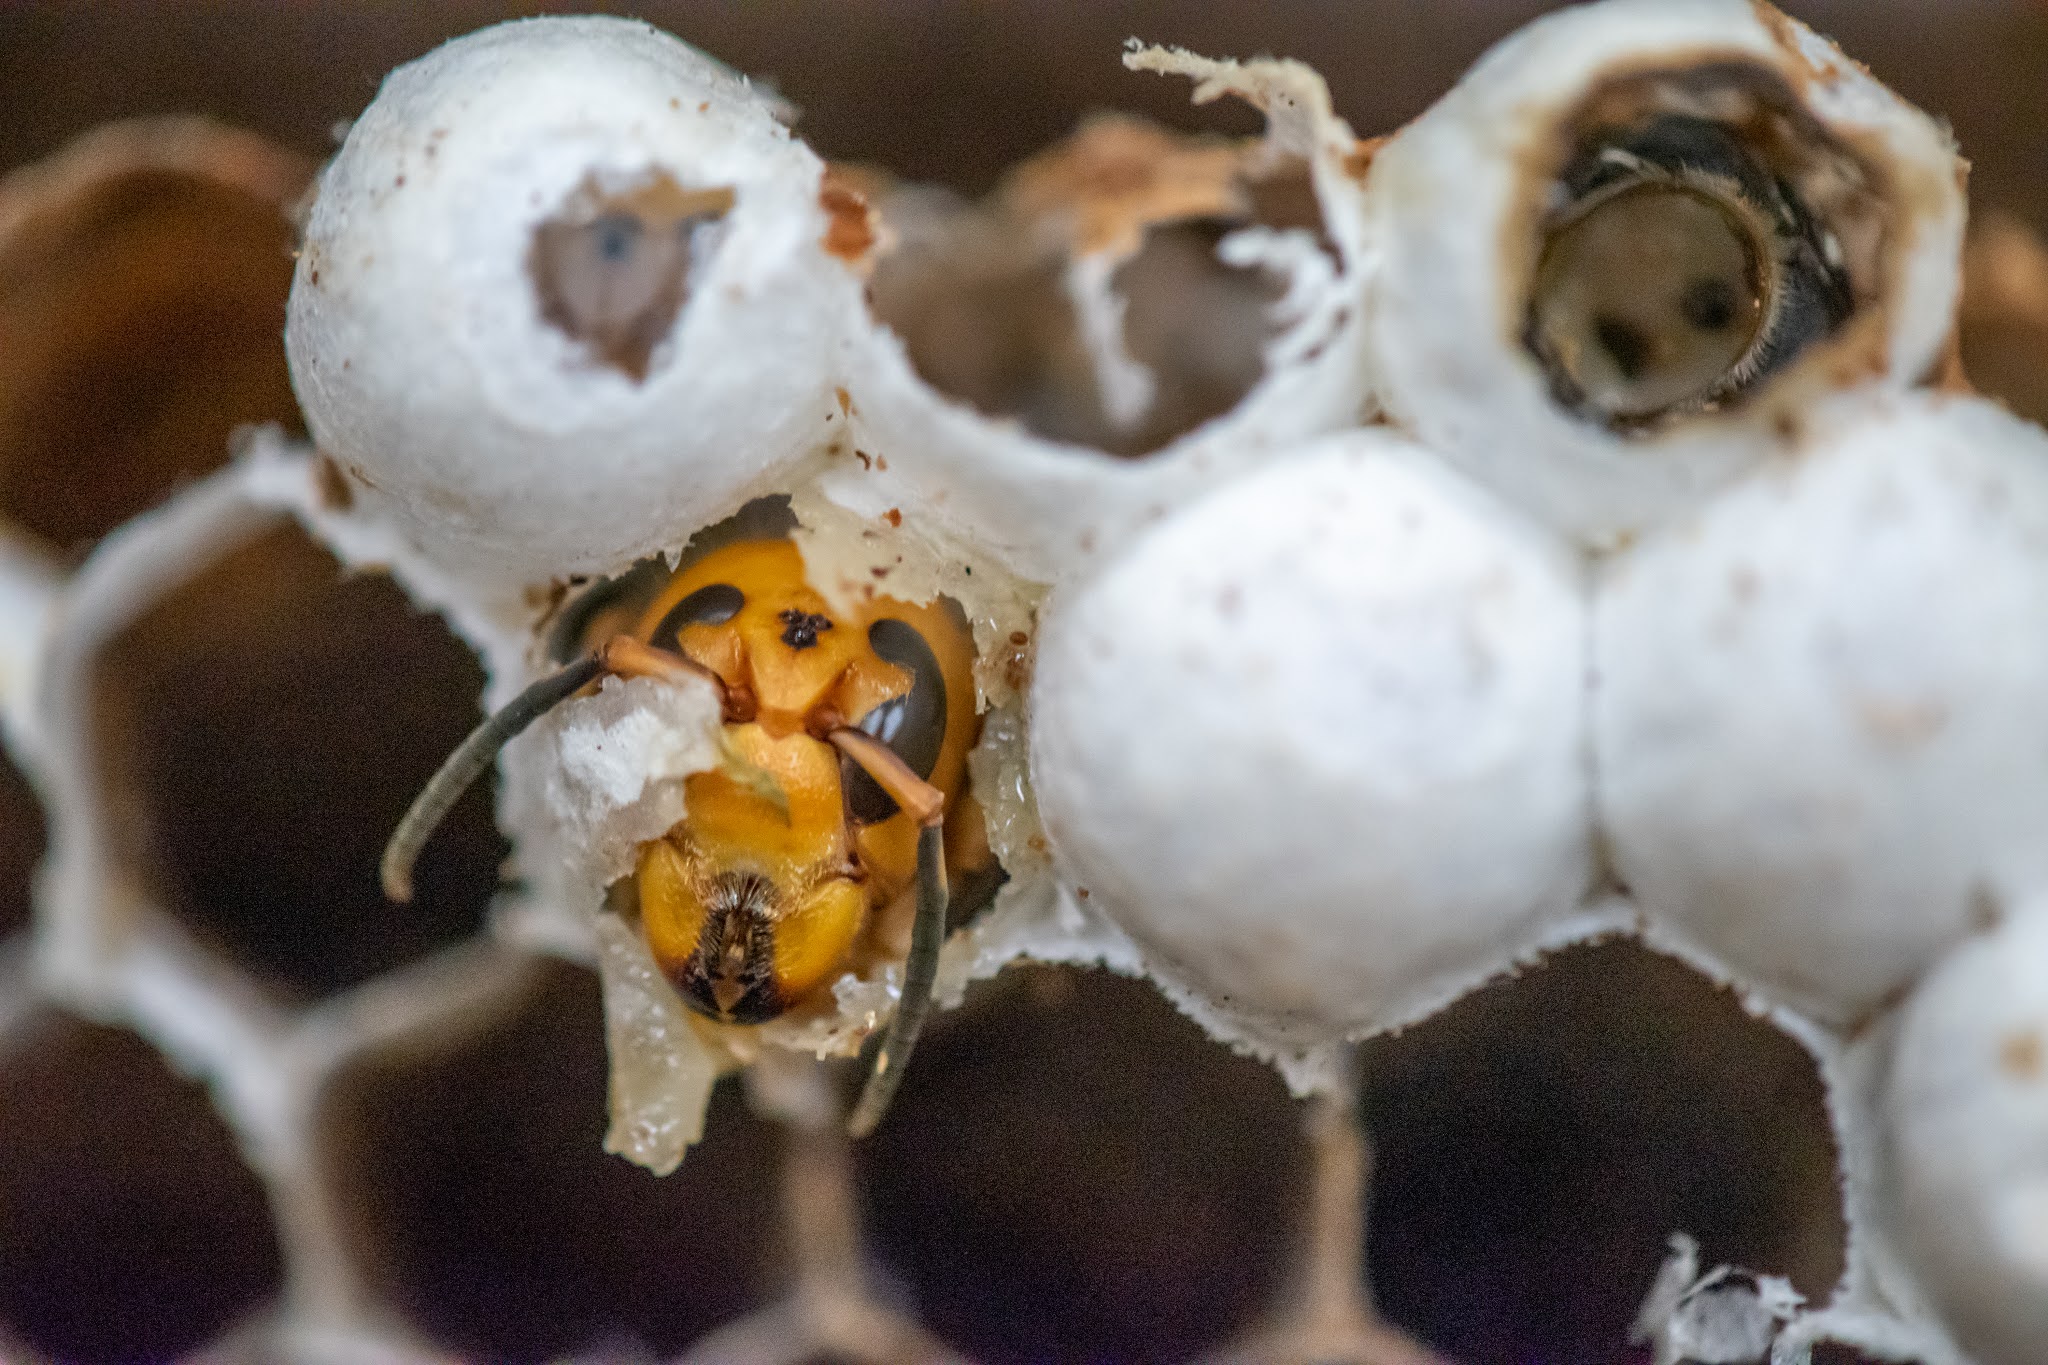 A nest by the numbers - what WSDA found inside the Asian giant hornet nest.